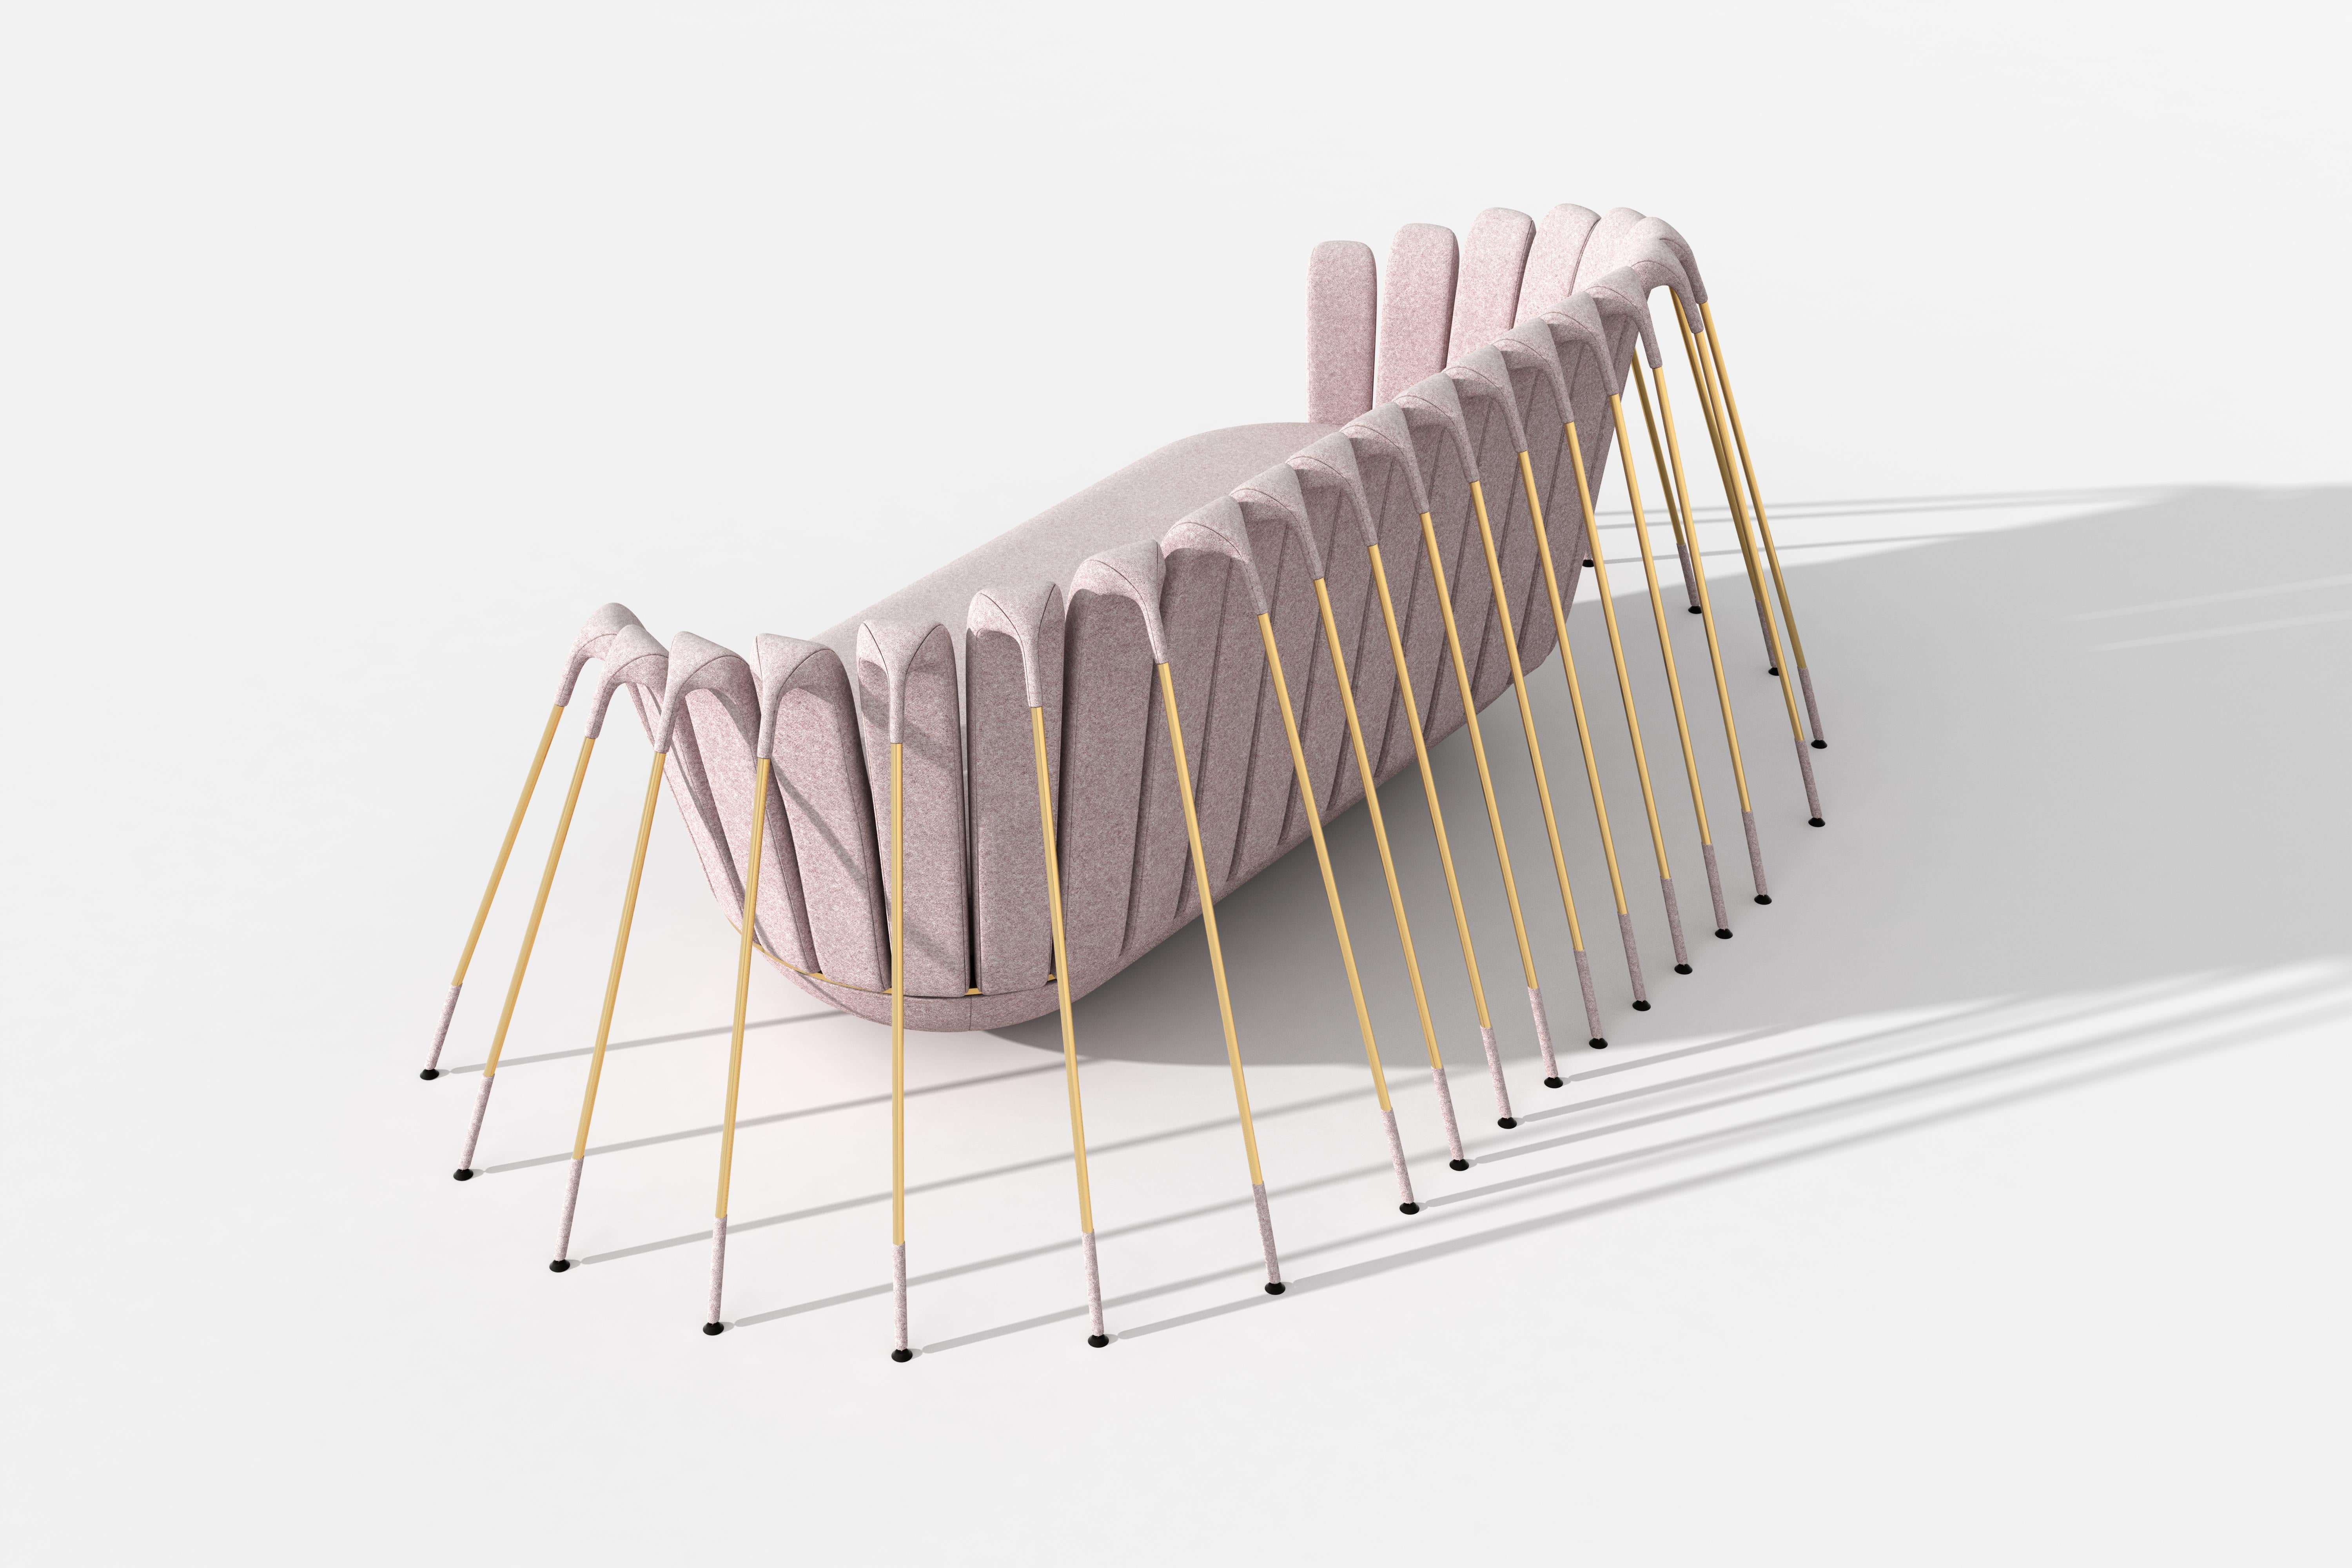 The Araigneé sofa has an upholstered seat in powder pink brushed cotton, placed on a rounded base and suspended by a multitude of gold metal legs.

While Marc Ange's most iconic creation Le Refuge proposed an island of safety and comfort, Les